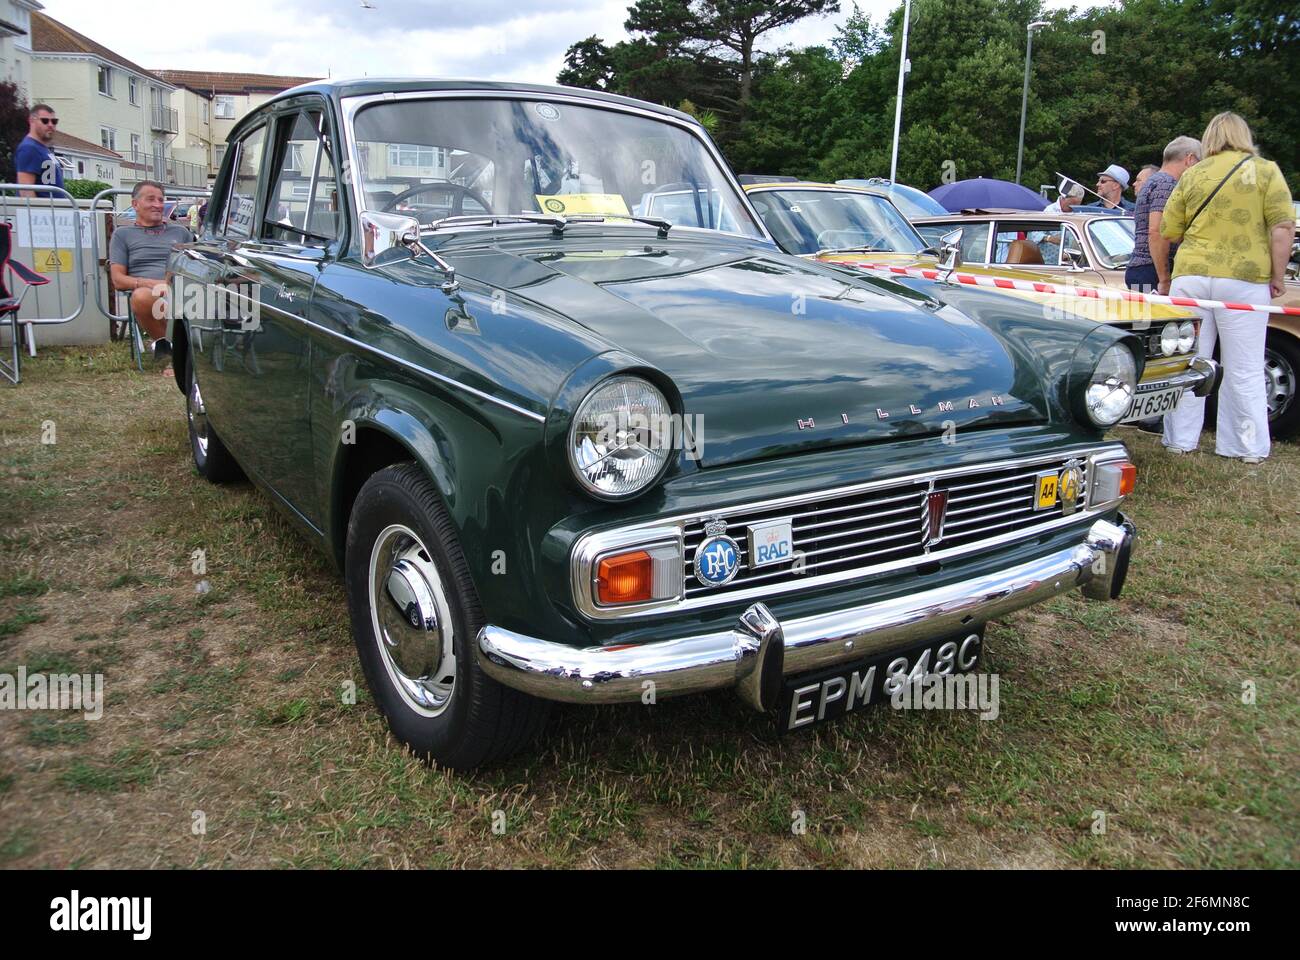 A 1964 Hillman Minx parked up on display at the English Riviera classic car show, Paignton, Devon, England, UK. Stock Photo